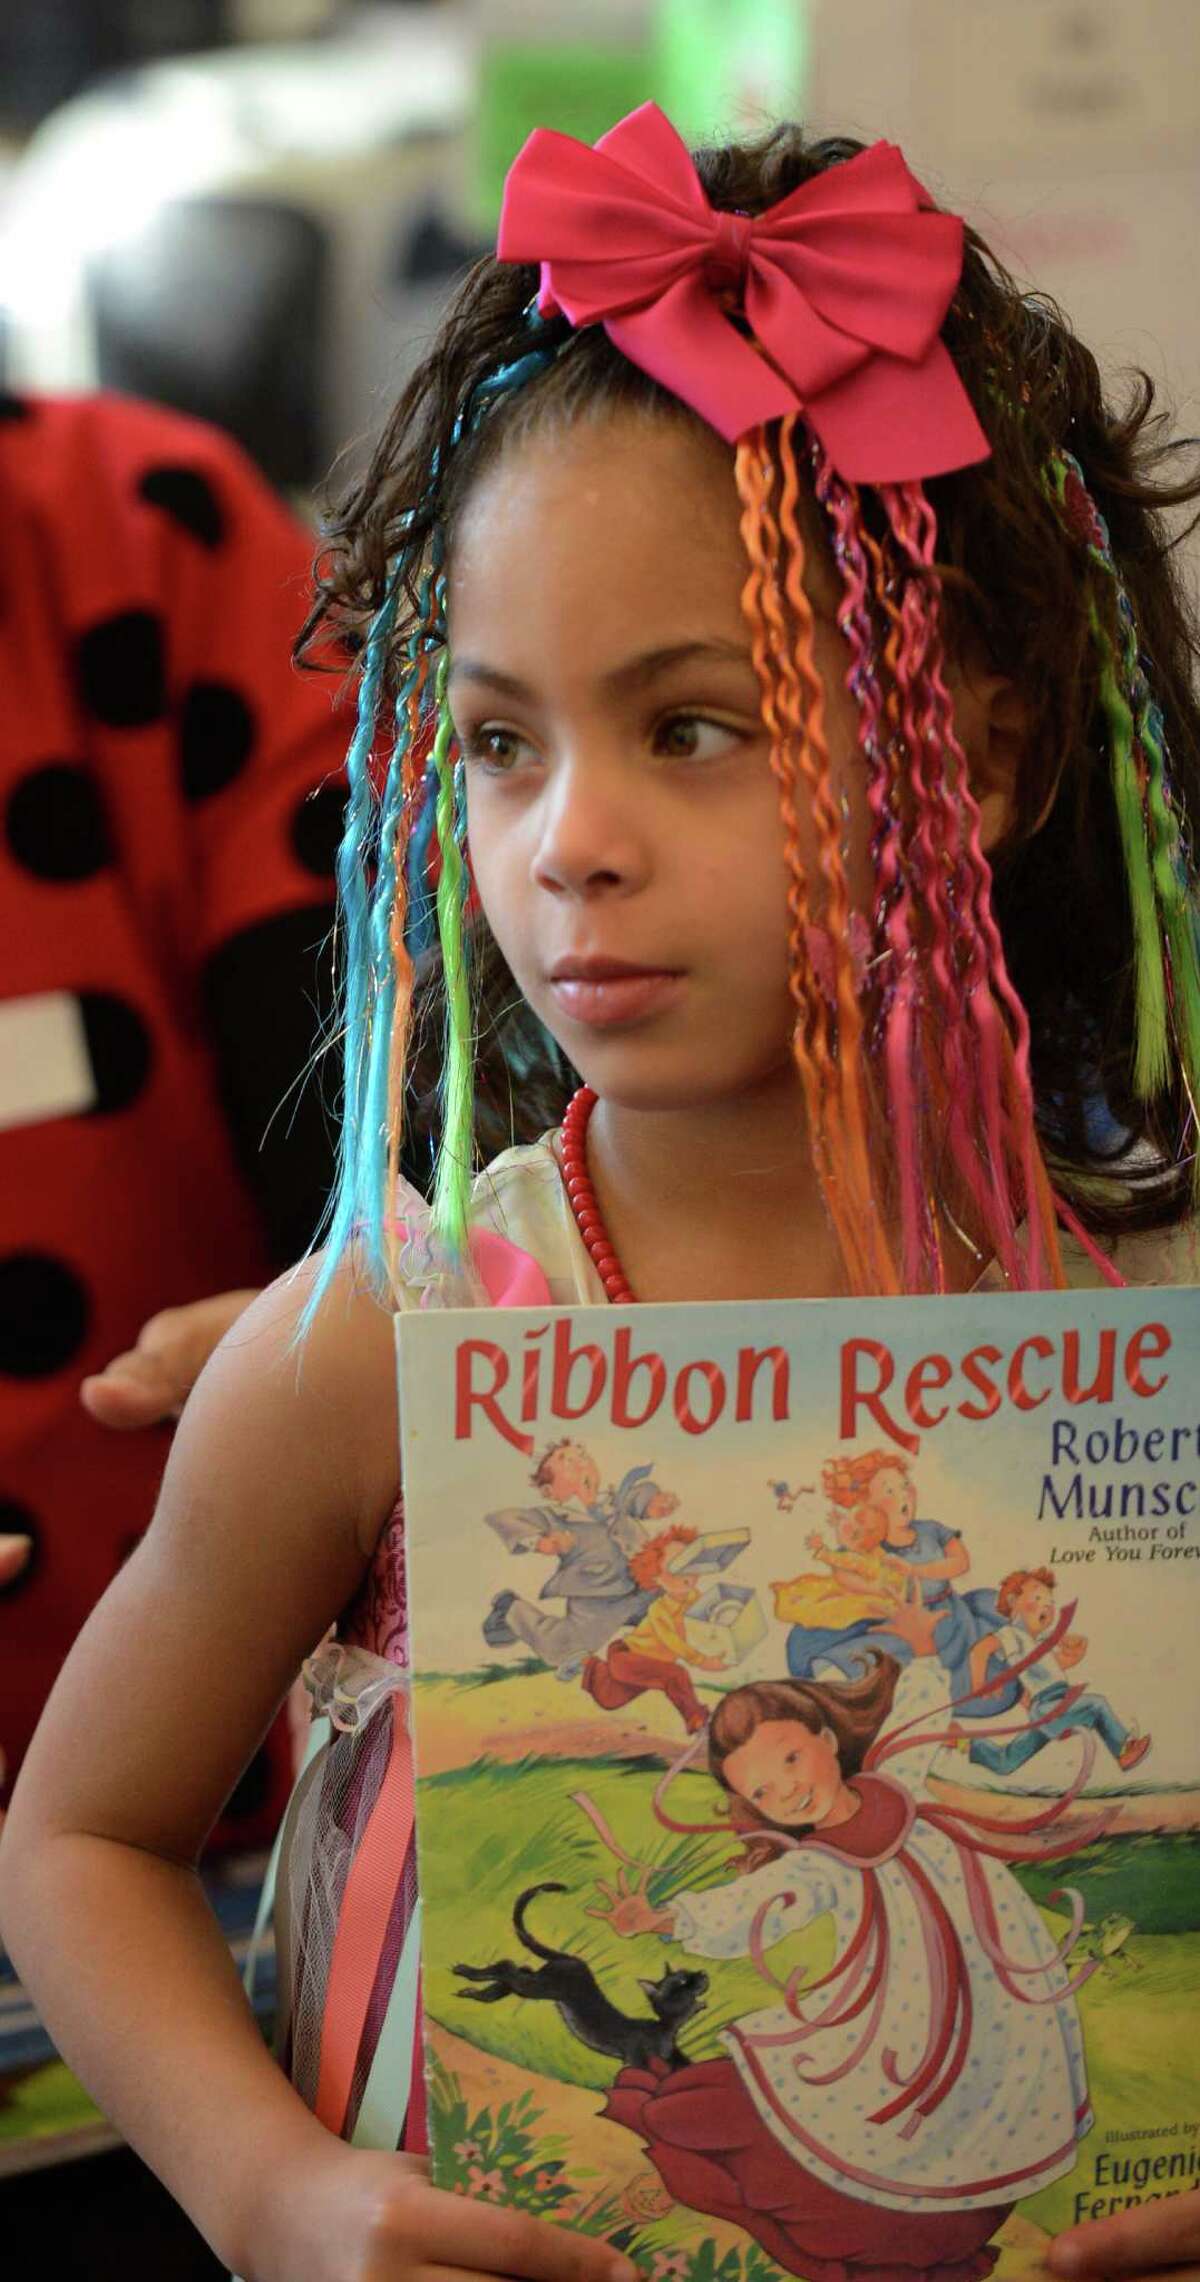 Janelis Peralta-Rodriguez wears her "Ribbon Rescue" costume March 21, 2013, during "living Literature Day" as part of the week-long literacy celebration at the Delaware Community School in Albany, N.Y.(Skip Dickstein/Times Union)